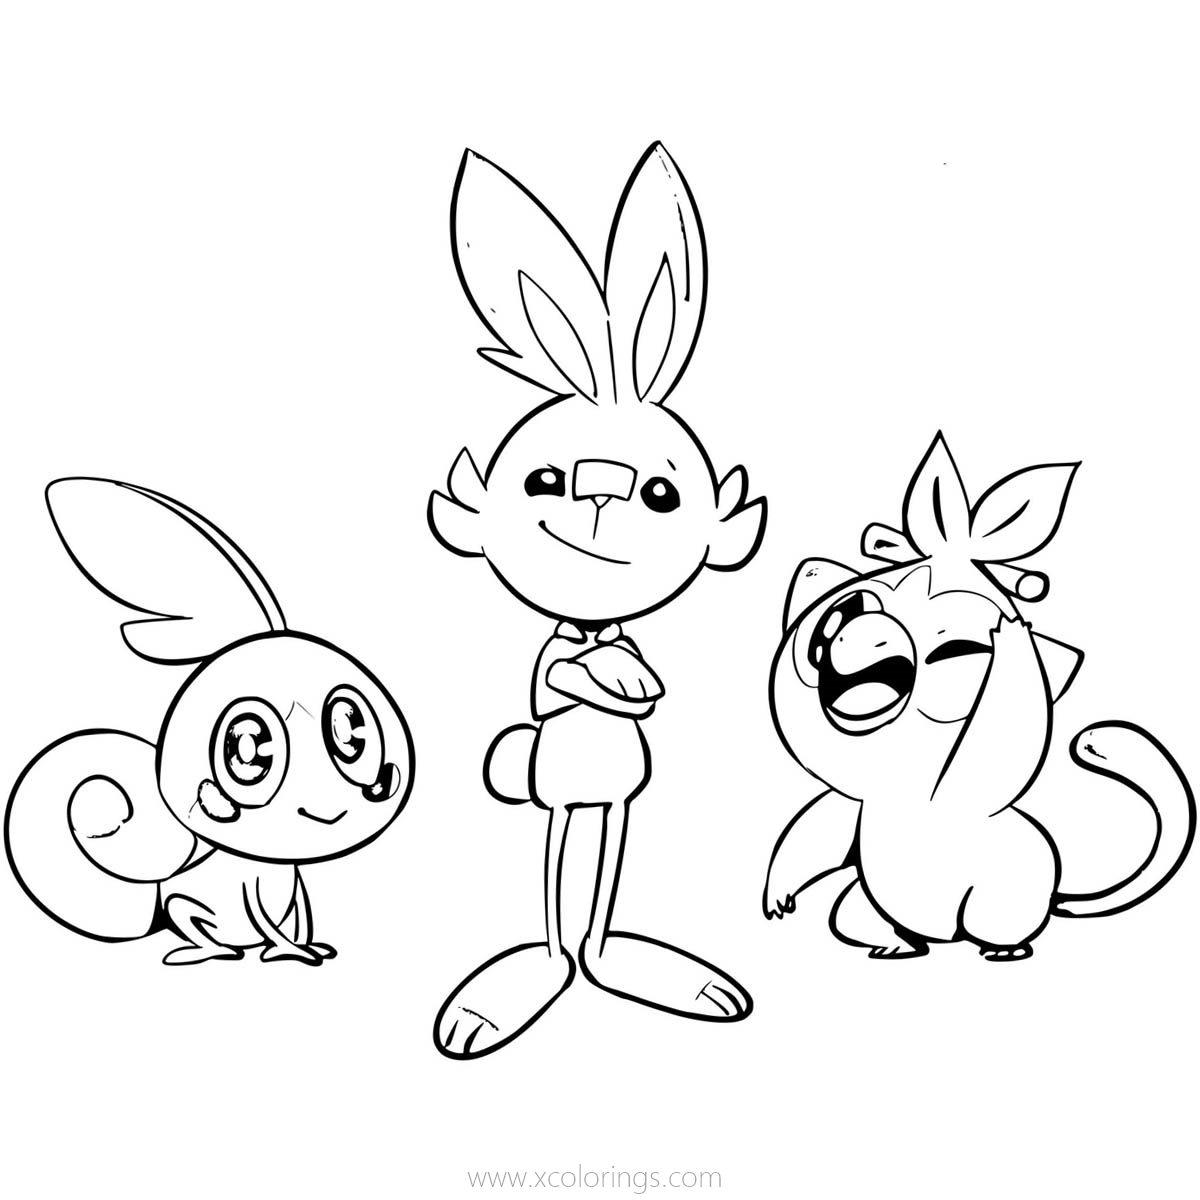 Free Sobble Pokemon Sword and Shield Coloring Pages with Scorbunny and Grookey printable